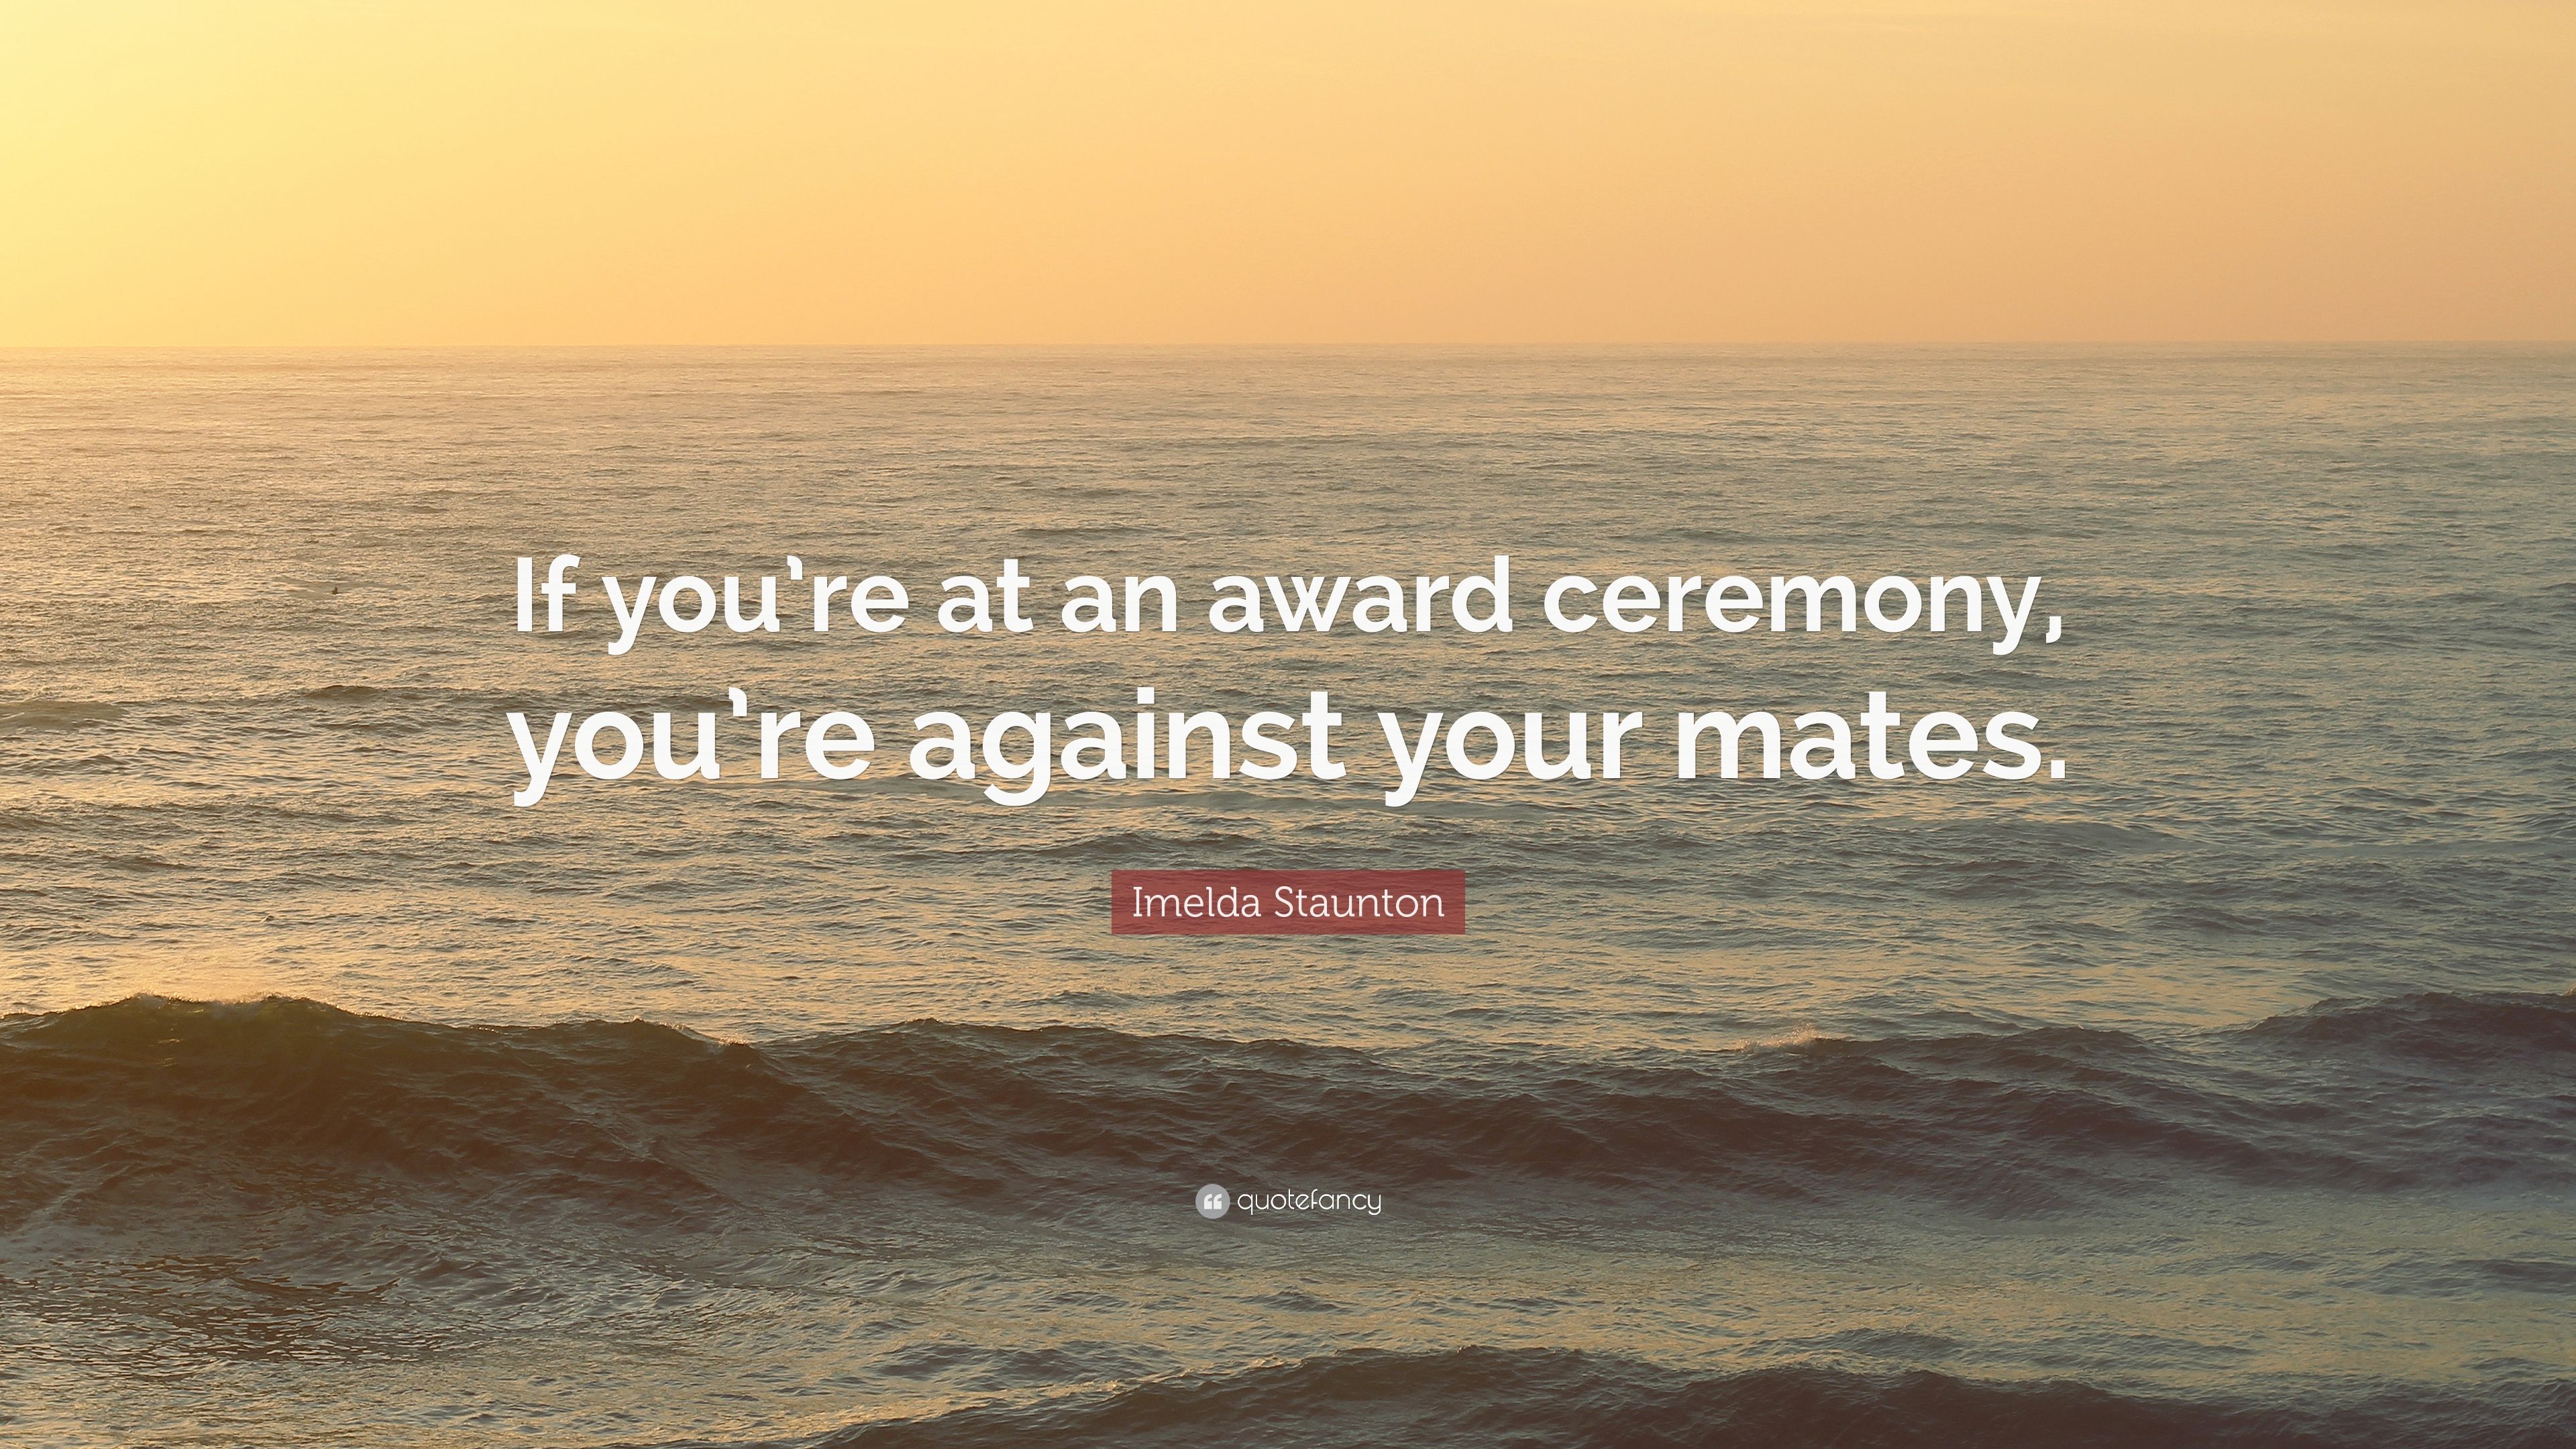 Imelda Staunton Quote: “If you're at an award ceremony, you